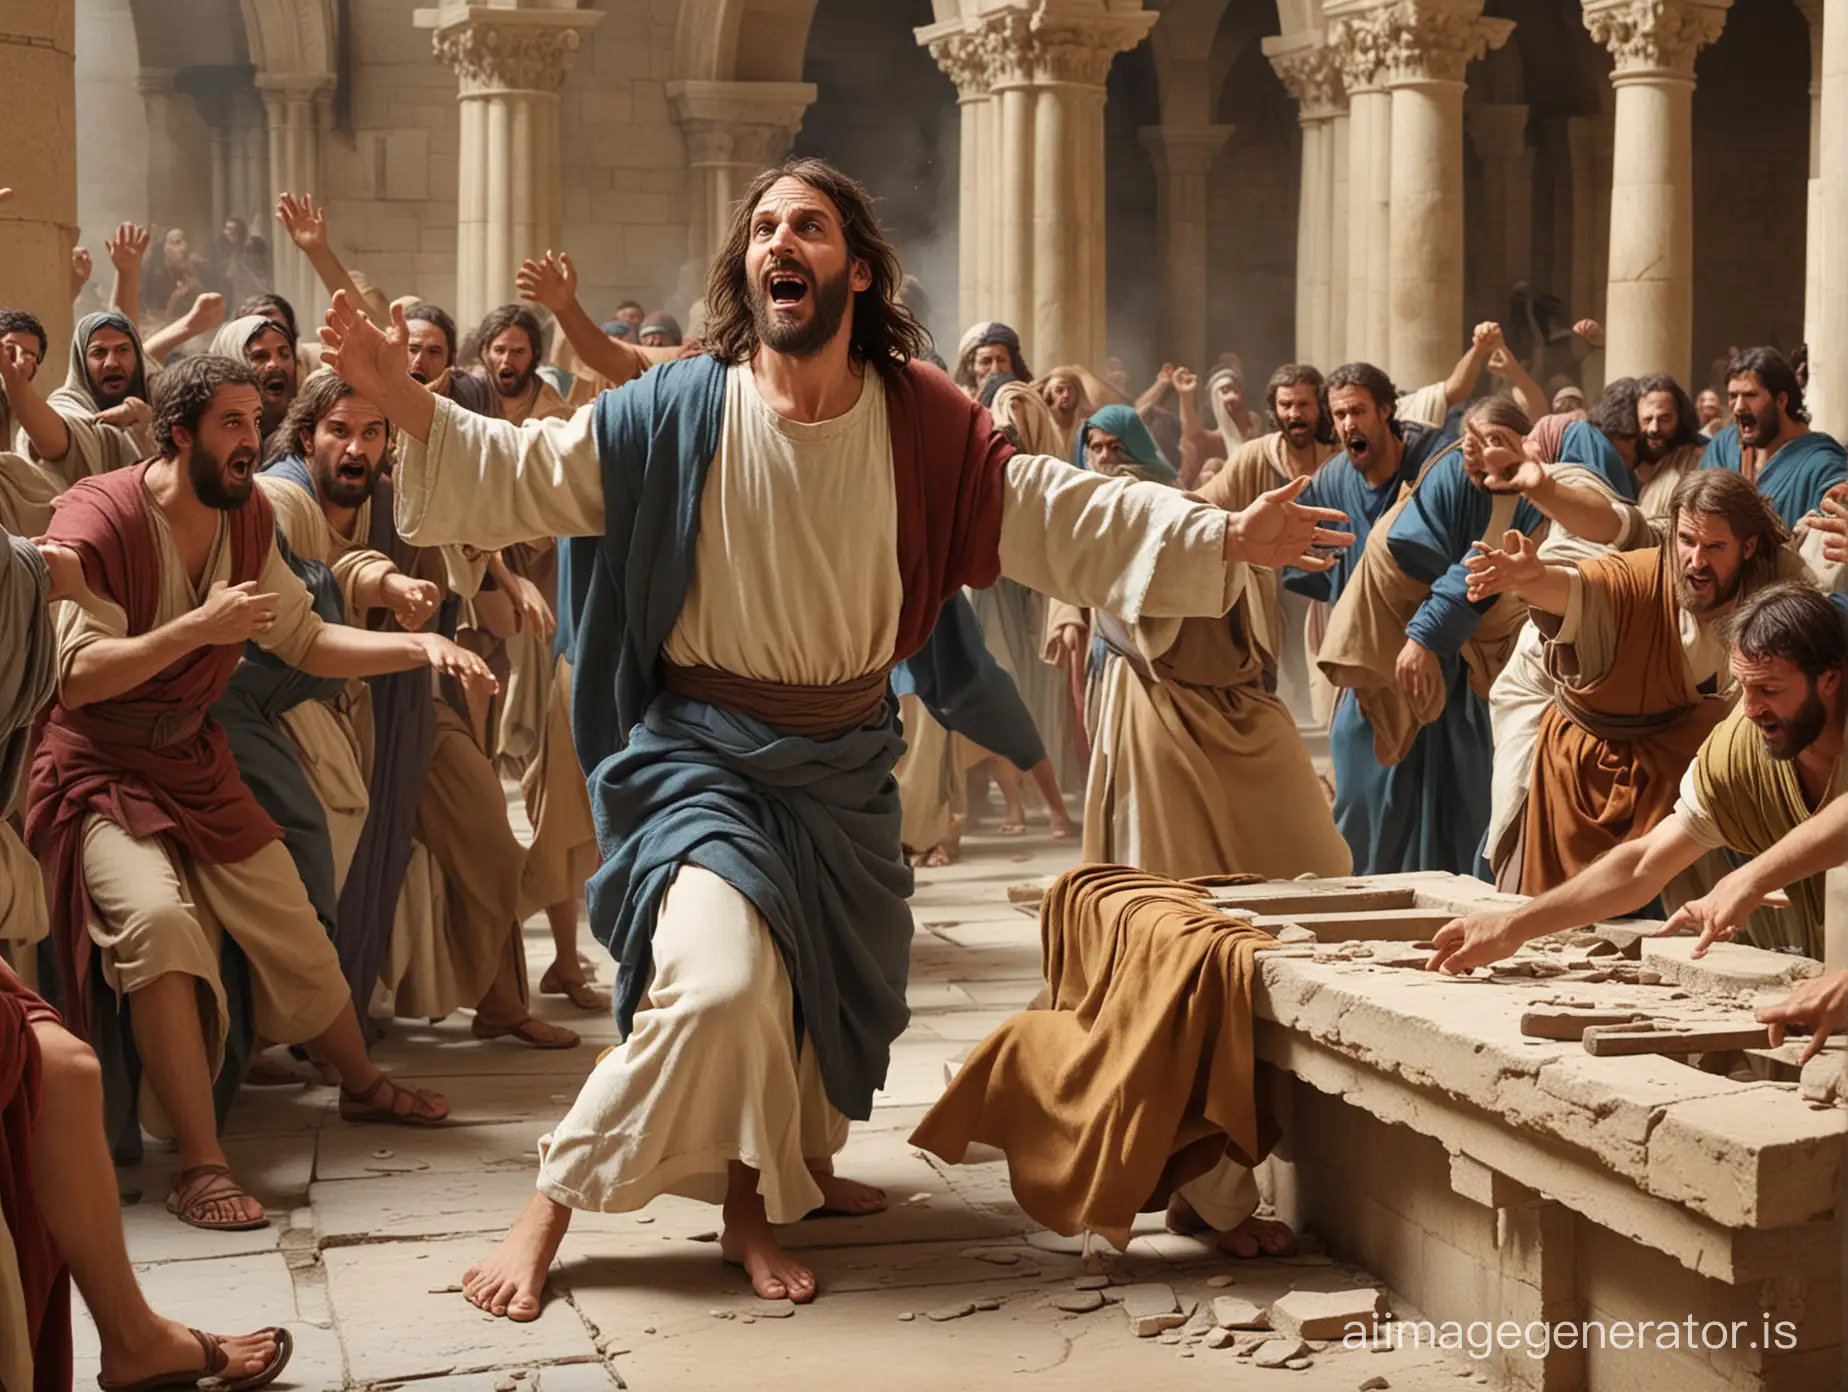 Jesus was angry and overturned the tables of the money changers in the temple